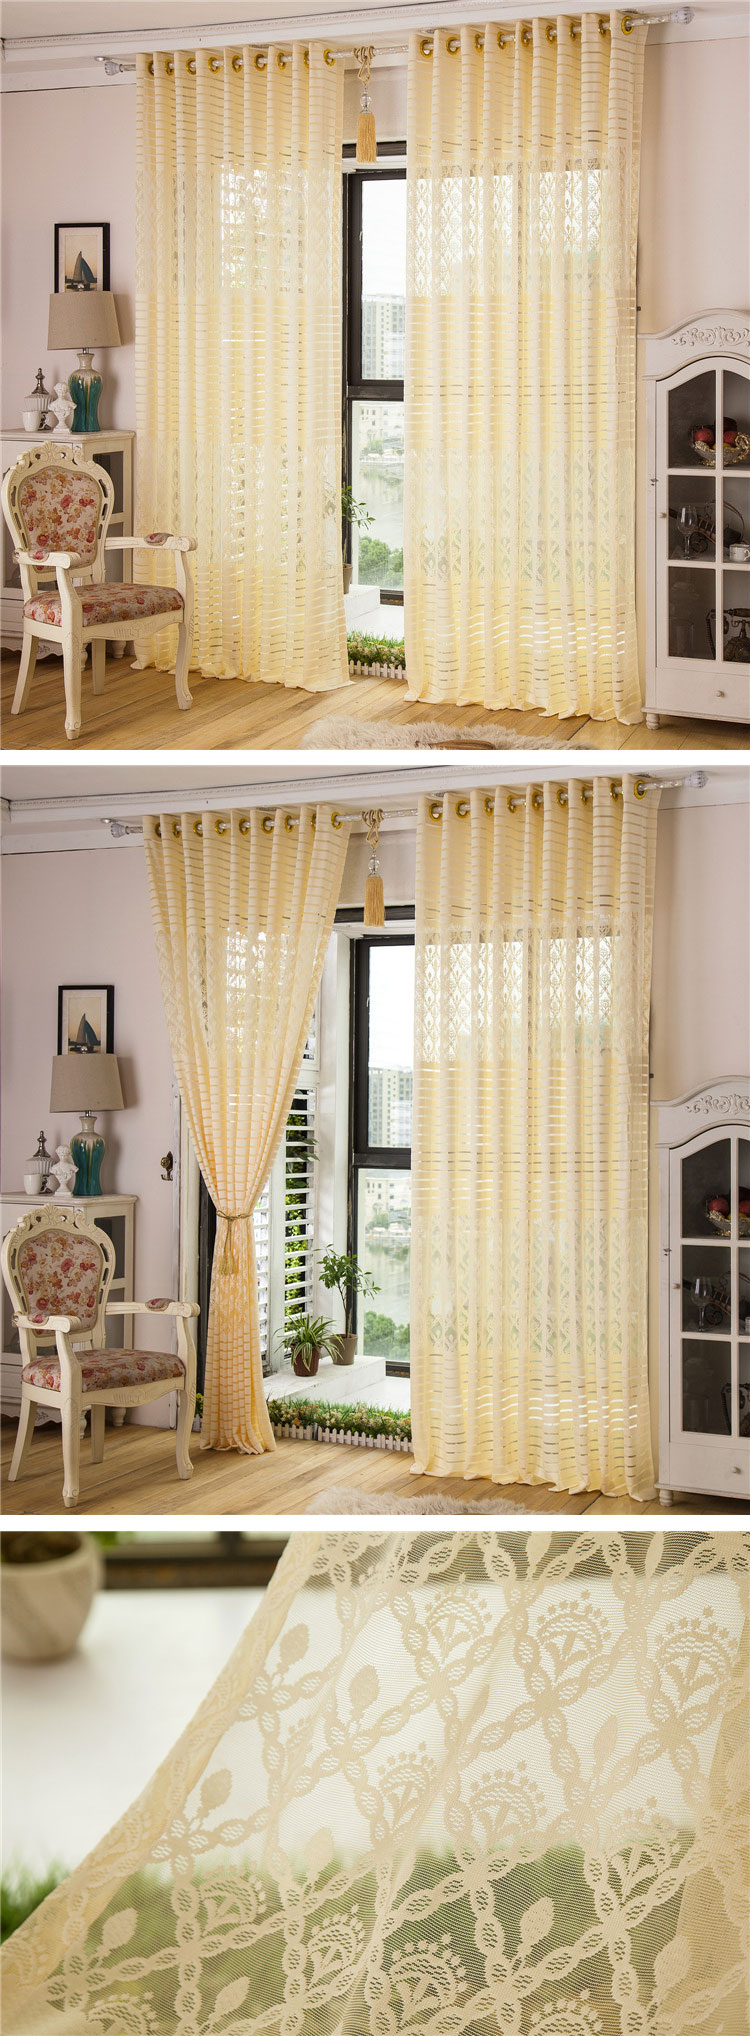 2-Panel-Jacquard-Lace-Sheer-Tulle-Curtains-Bedroom-Living-Room-Hollow-Out-Window-Screening-1059882